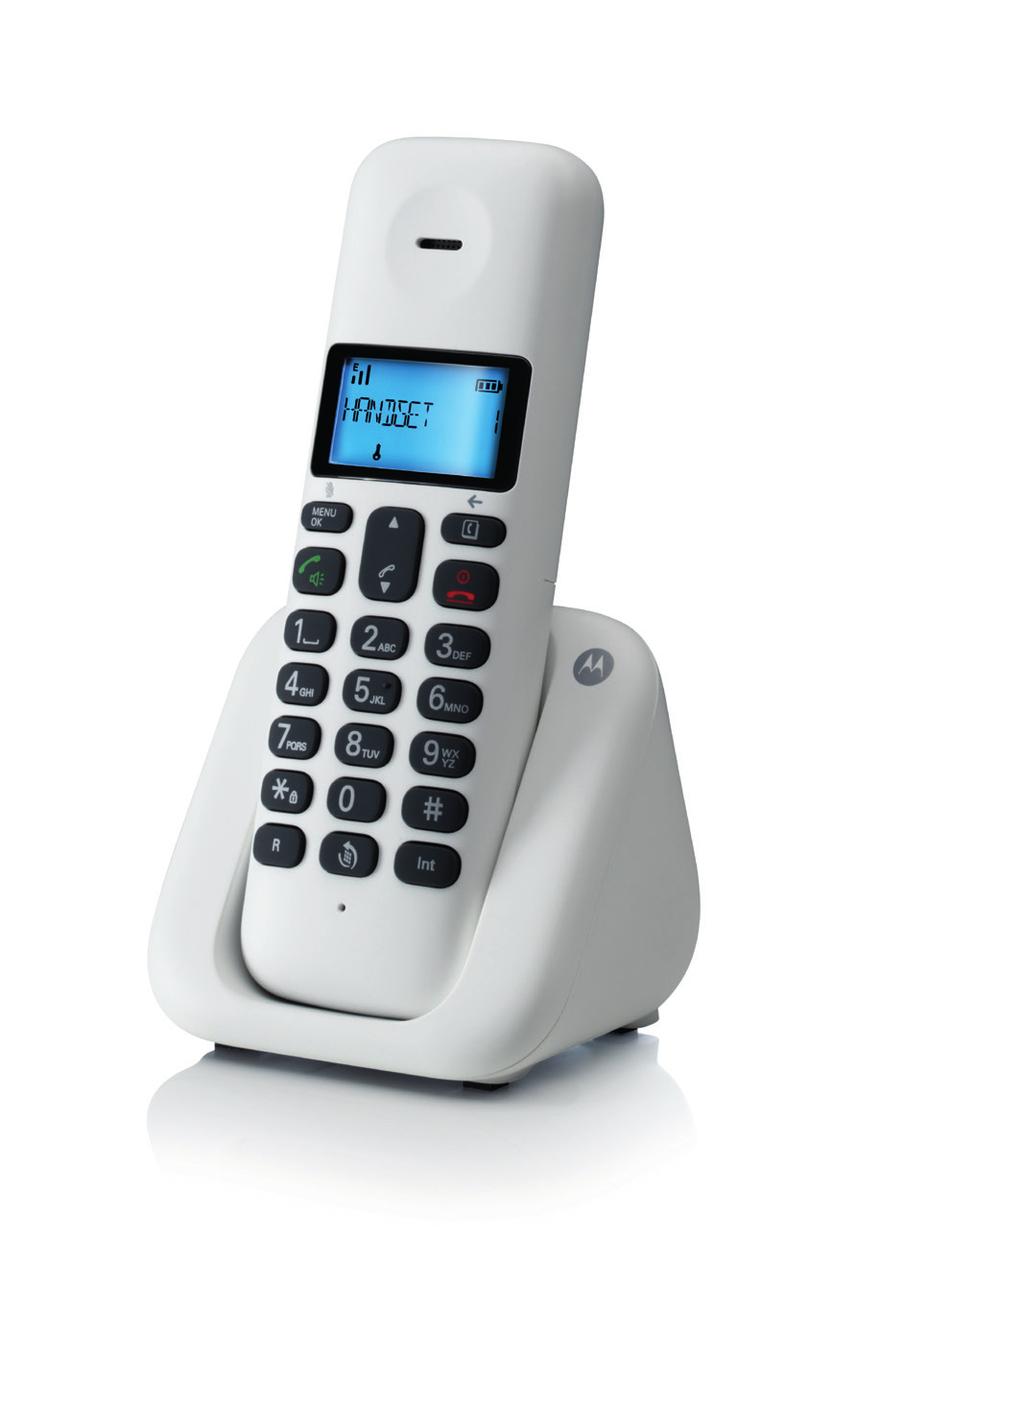 EU Version No.:1 ALSO AVAILABLE IN WHITE For more information, please contact: enquiries@suncorptech.com Digital Cordless Telephone Manufactured, distributed or sold by Suncorp Technologies Ltd.